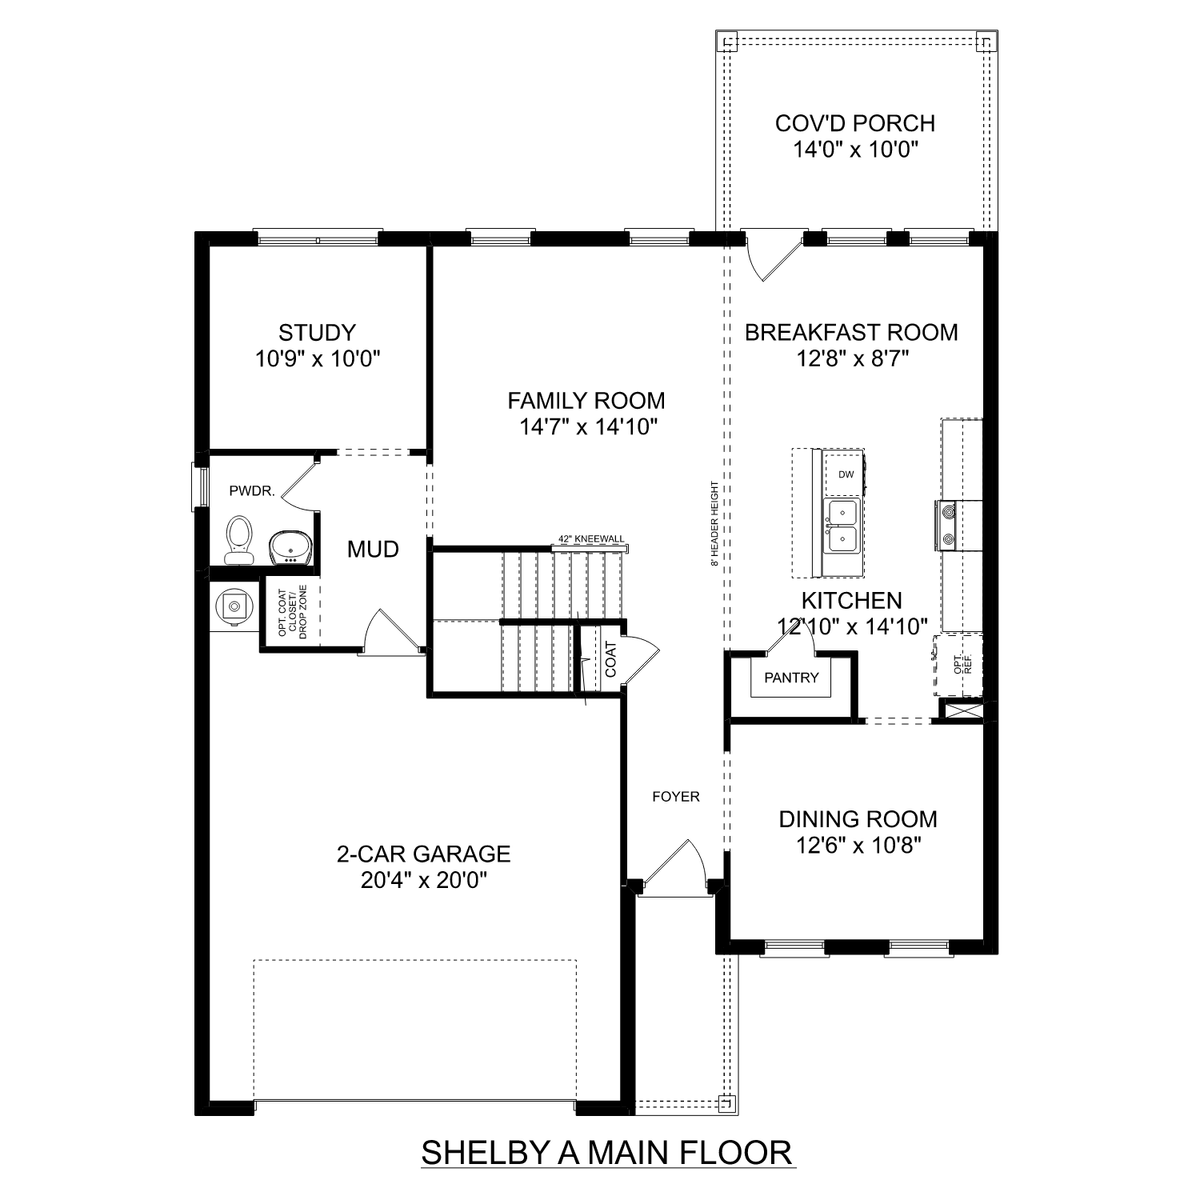 1 - The Shelby A buildable floor plan layout in Davidson Homes' Wood Trail community.